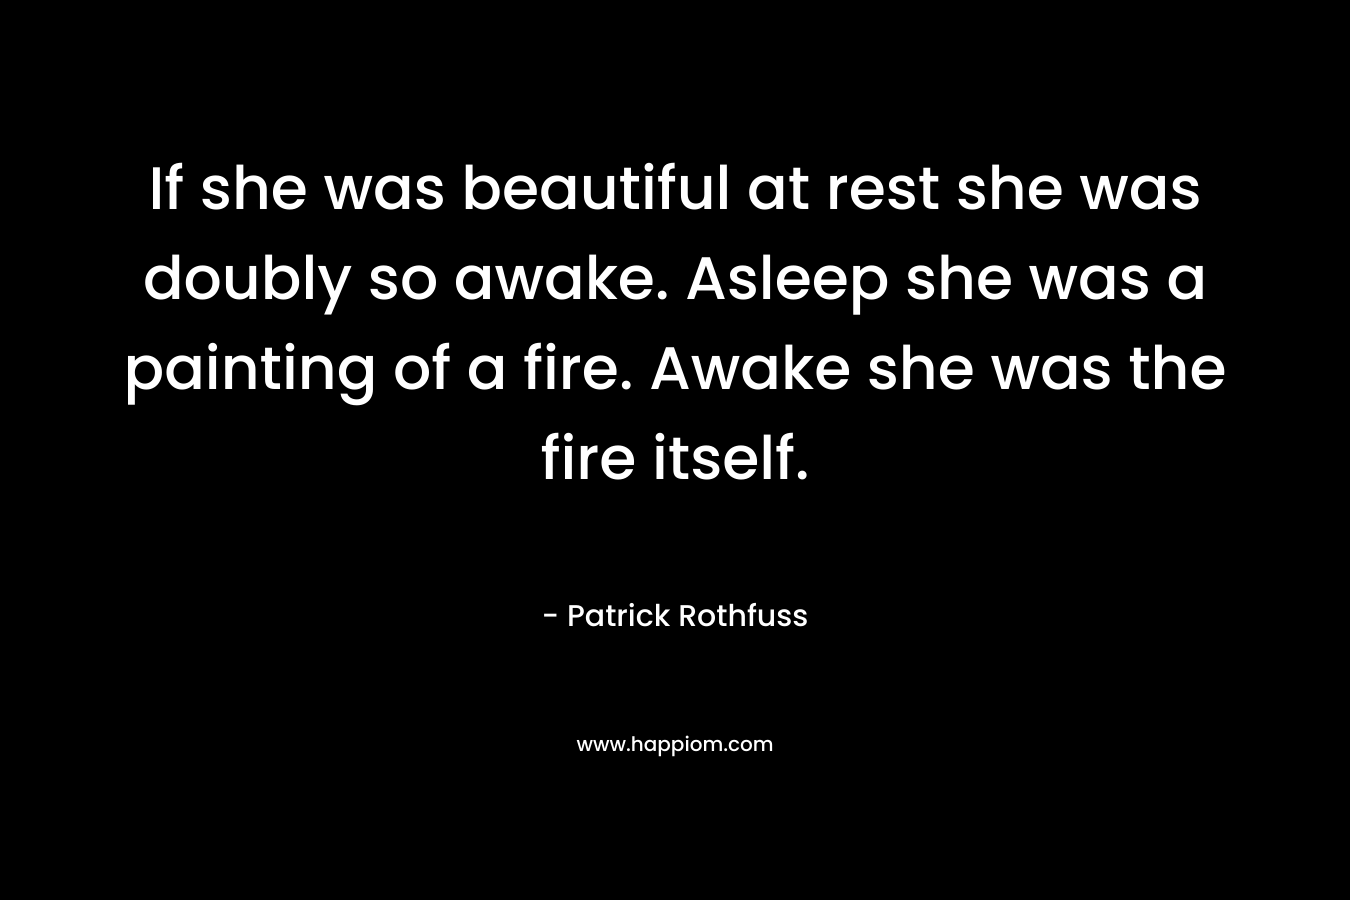 If she was beautiful at rest she was doubly so awake. Asleep she was a painting of a fire. Awake she was the fire itself.